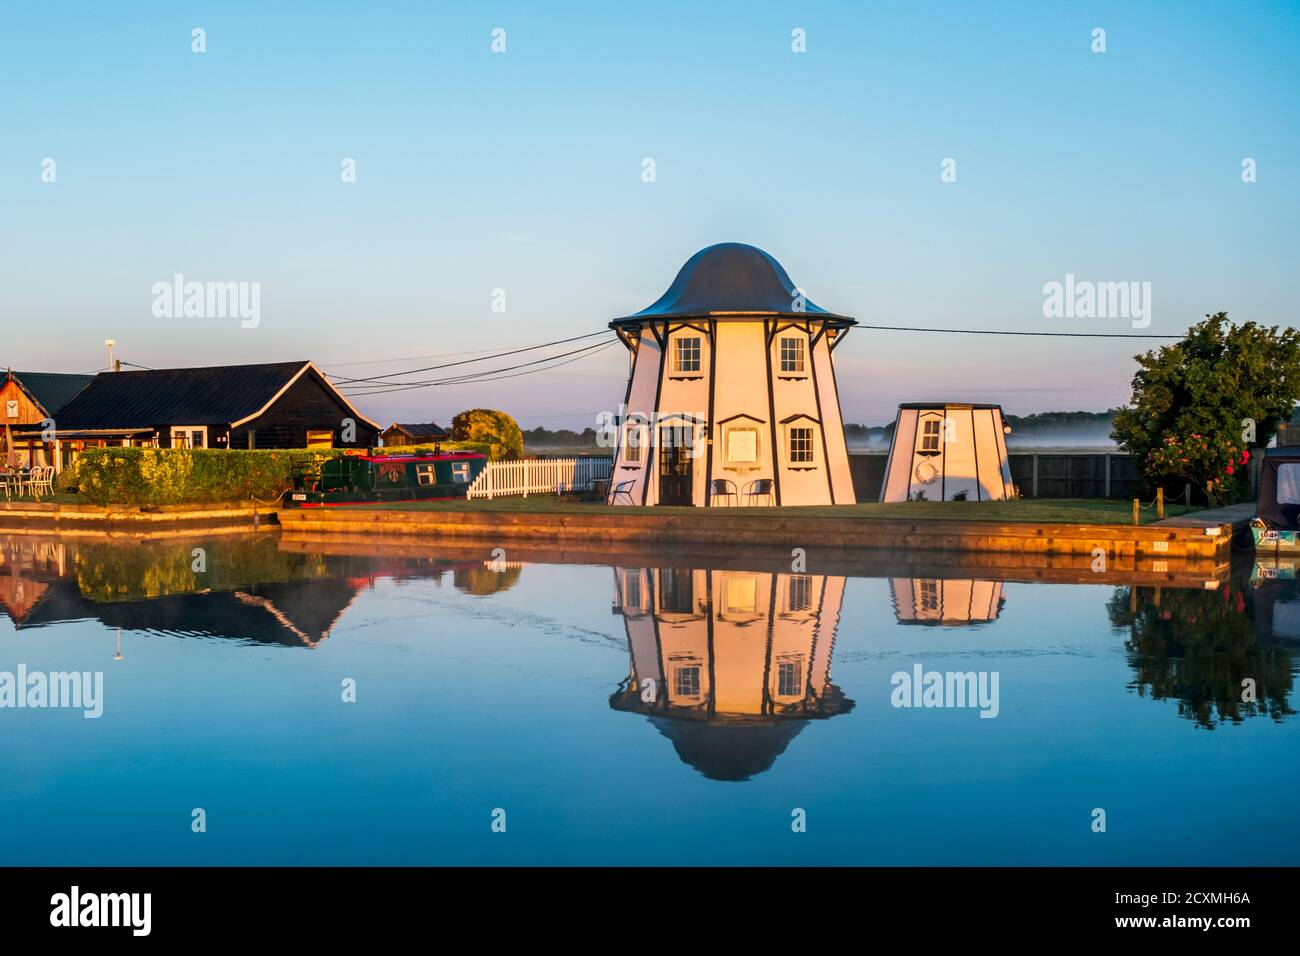 Dutch Tutch, a former helter skelter, reflected in the River Thurne at Potter Heigham, Norfolk Broads. Stock Photo